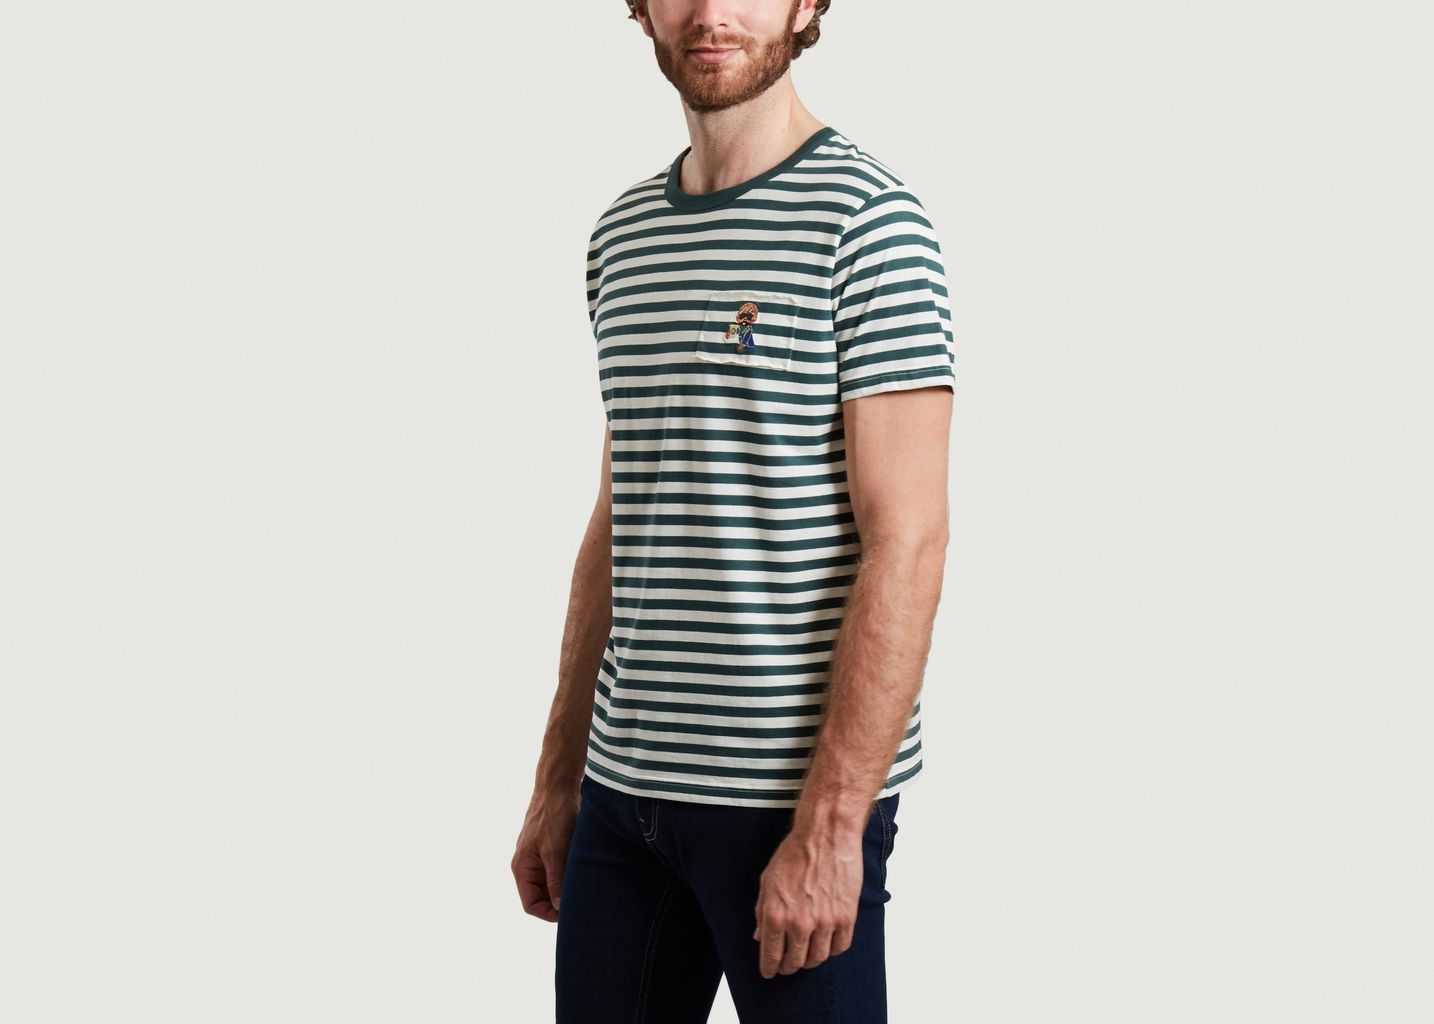 Striped t-shirt with dog embroidery - Maison Labiche